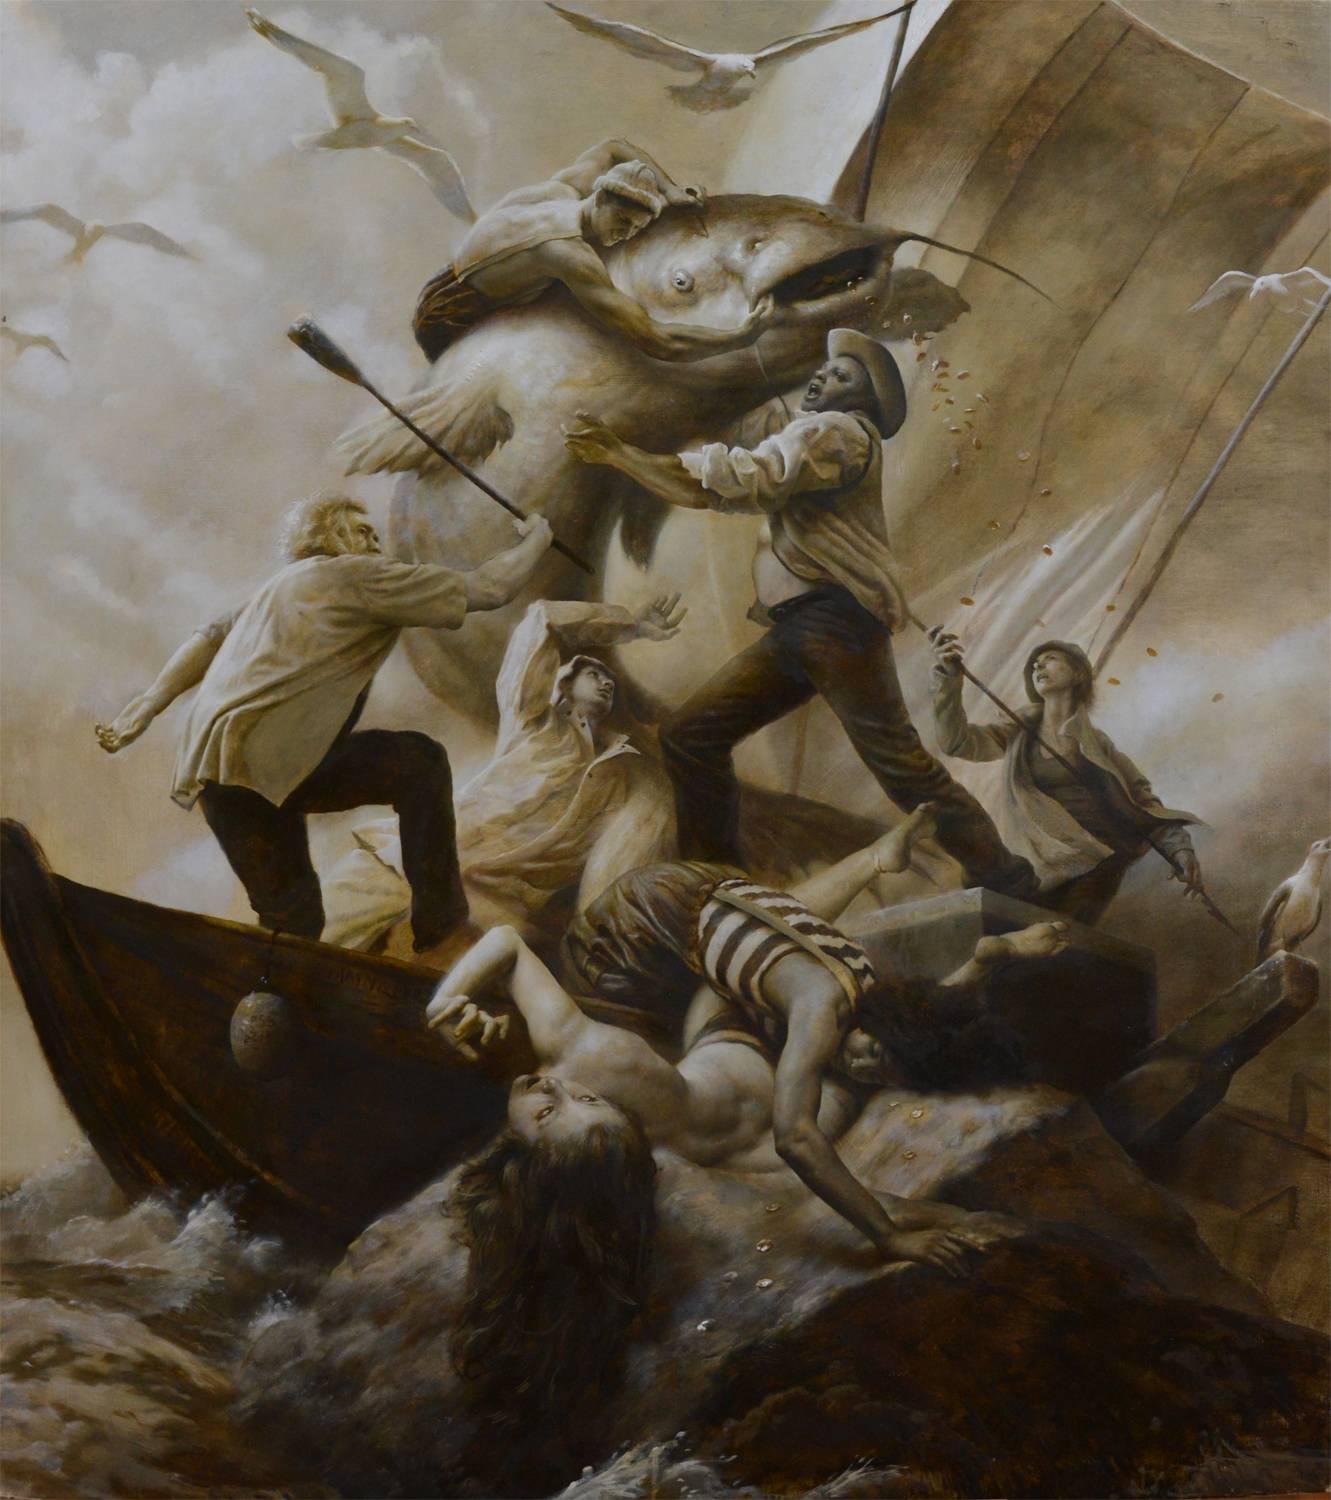 Taming Leviathan - Painting by Adam Miller